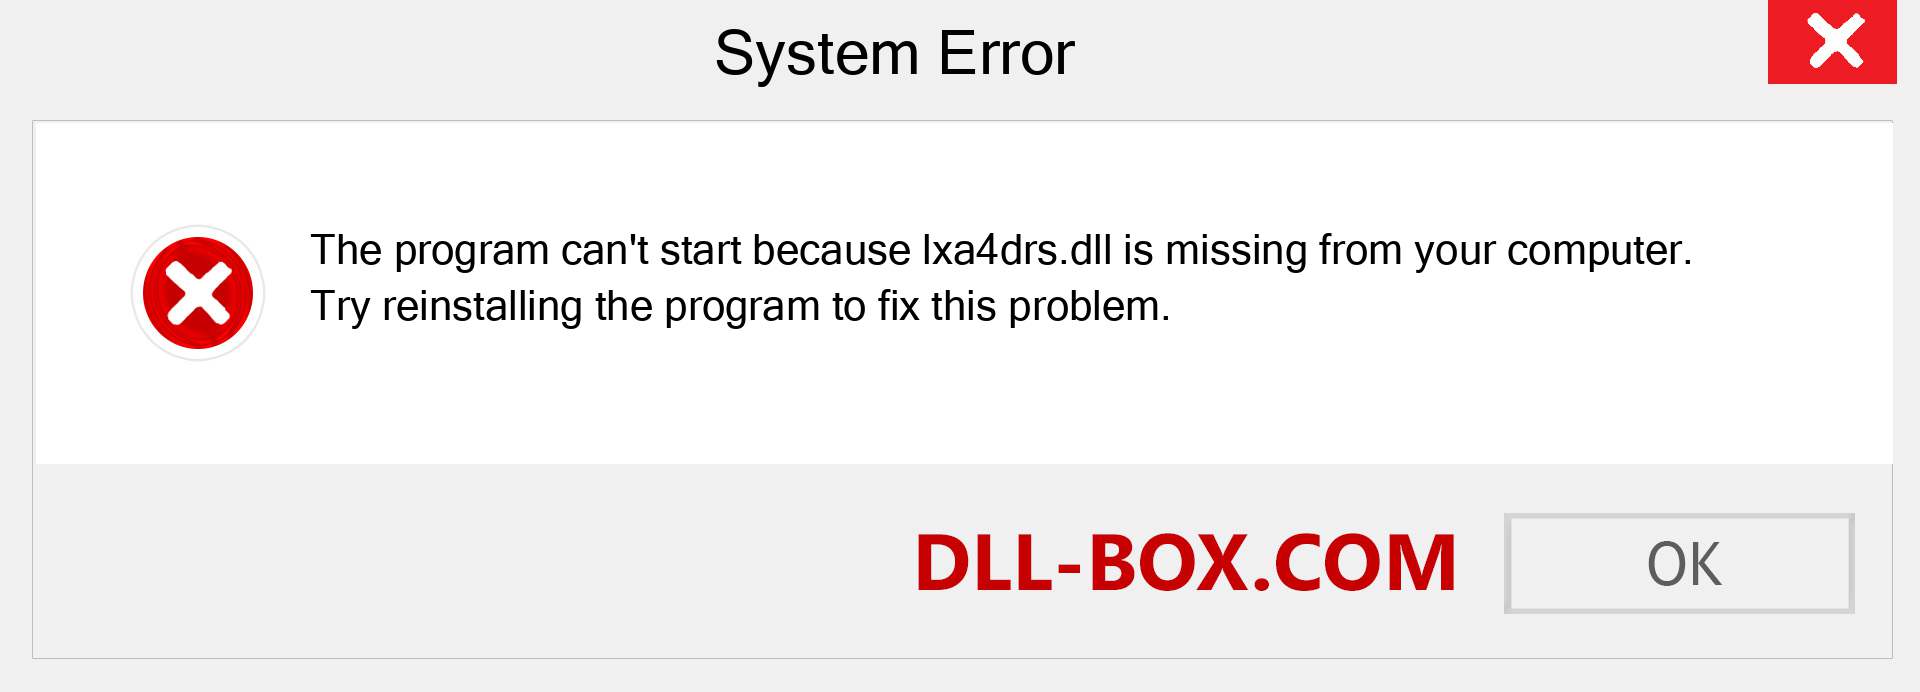  lxa4drs.dll file is missing?. Download for Windows 7, 8, 10 - Fix  lxa4drs dll Missing Error on Windows, photos, images